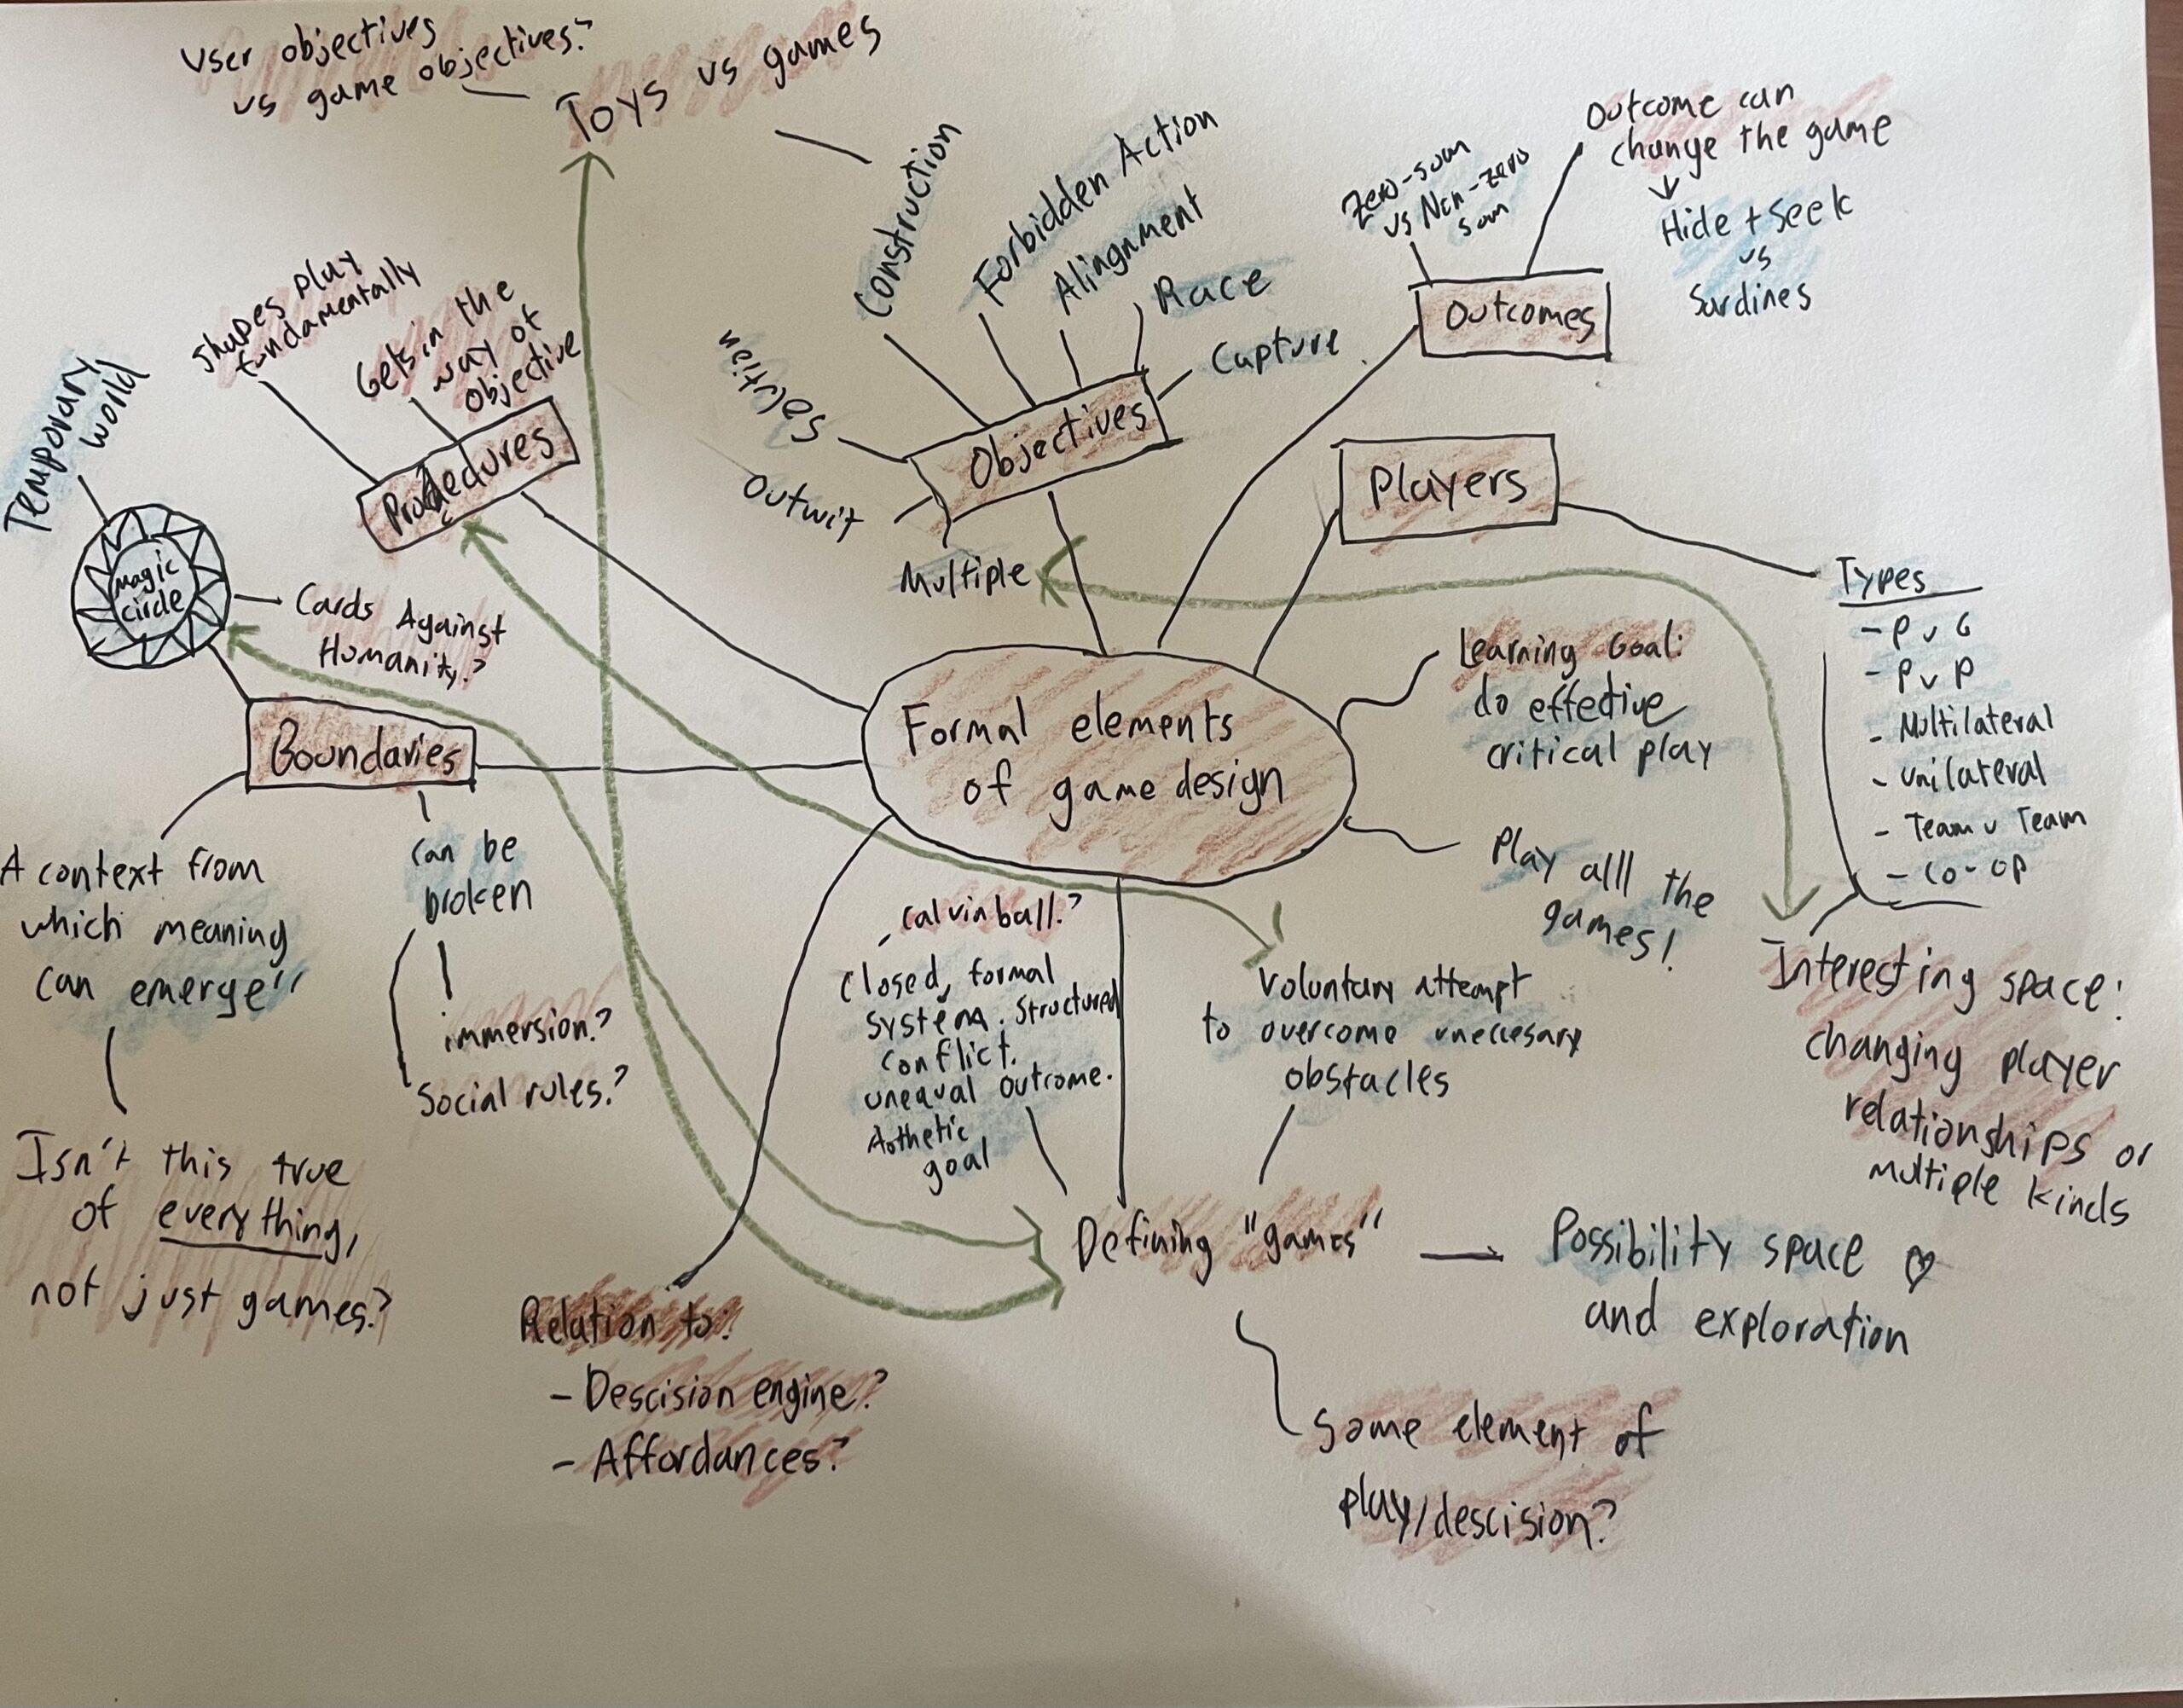 Mind map of the formal elements of game design (Inaccessible)